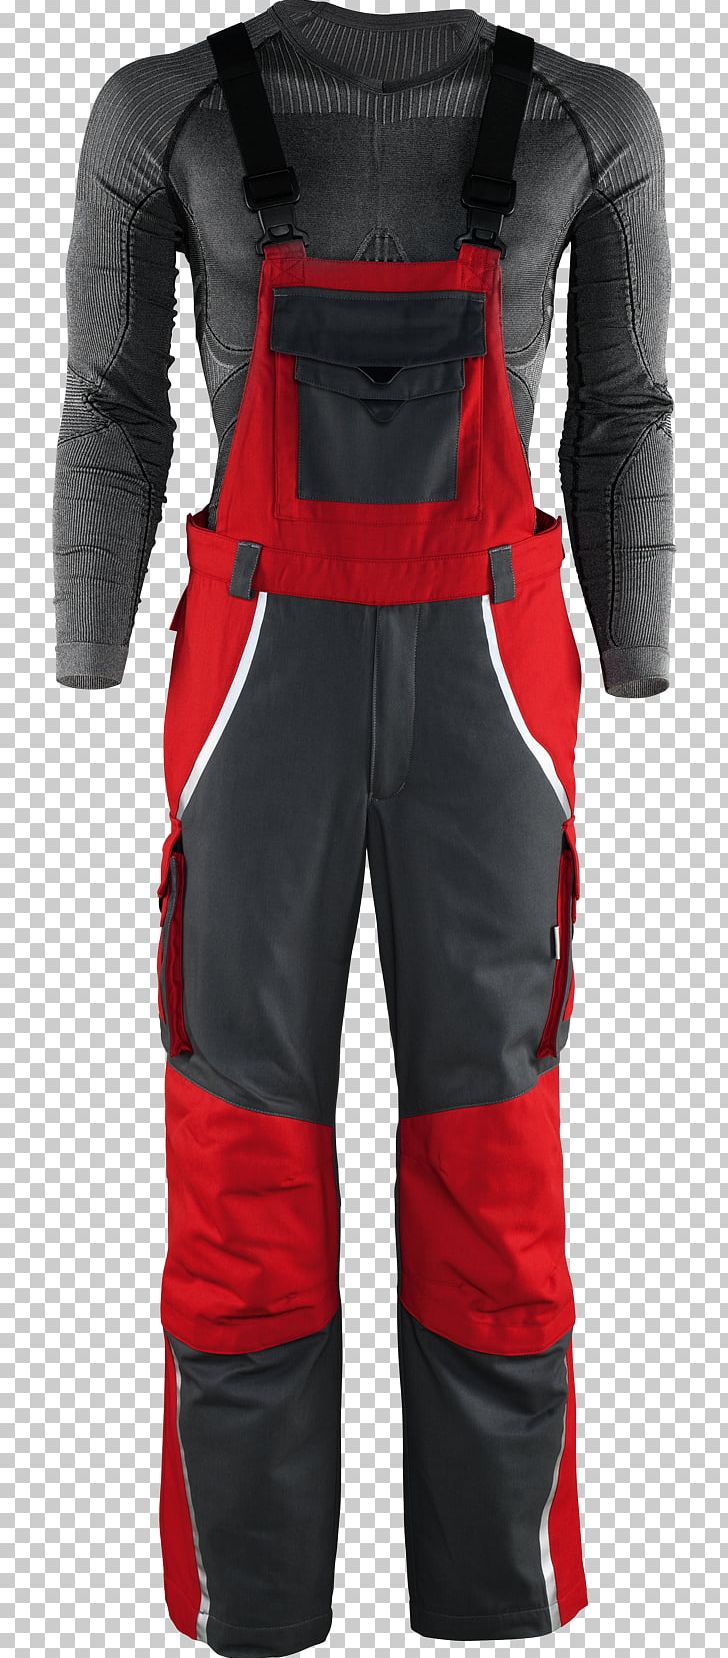 Adobe Flash Player Jacket Hockey Protective Pants & Ski Shorts Overall PNG, Clipart, Adobe Flash, Adobe Flash Player, Adobe Systems, Clothing, Dry Suit Free PNG Download